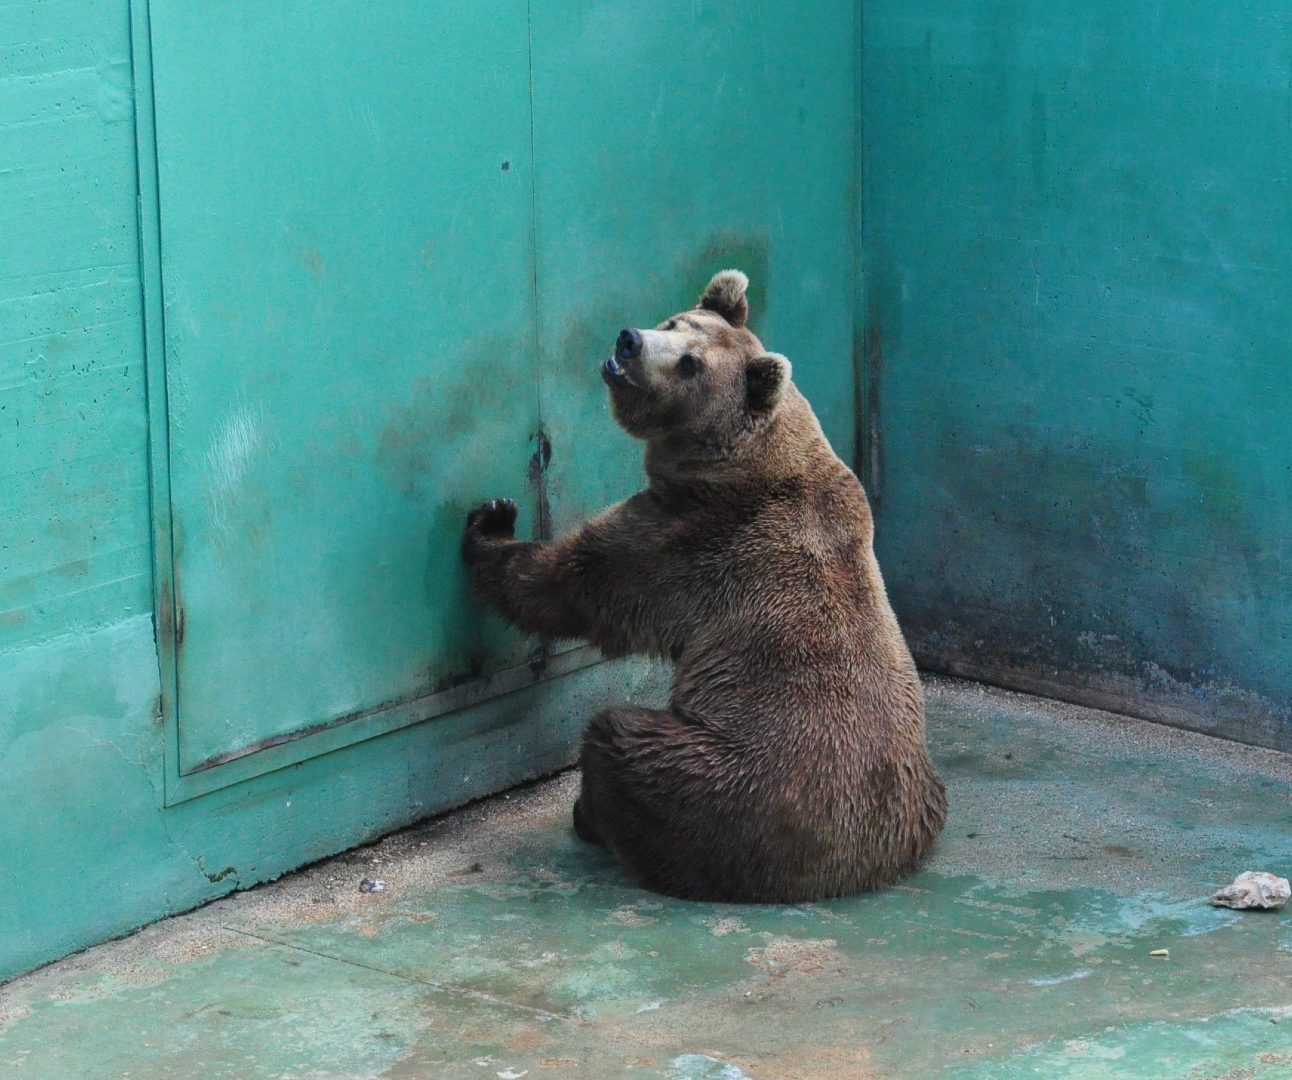 A captive brown bear sitting in a completely barren concrete pit.